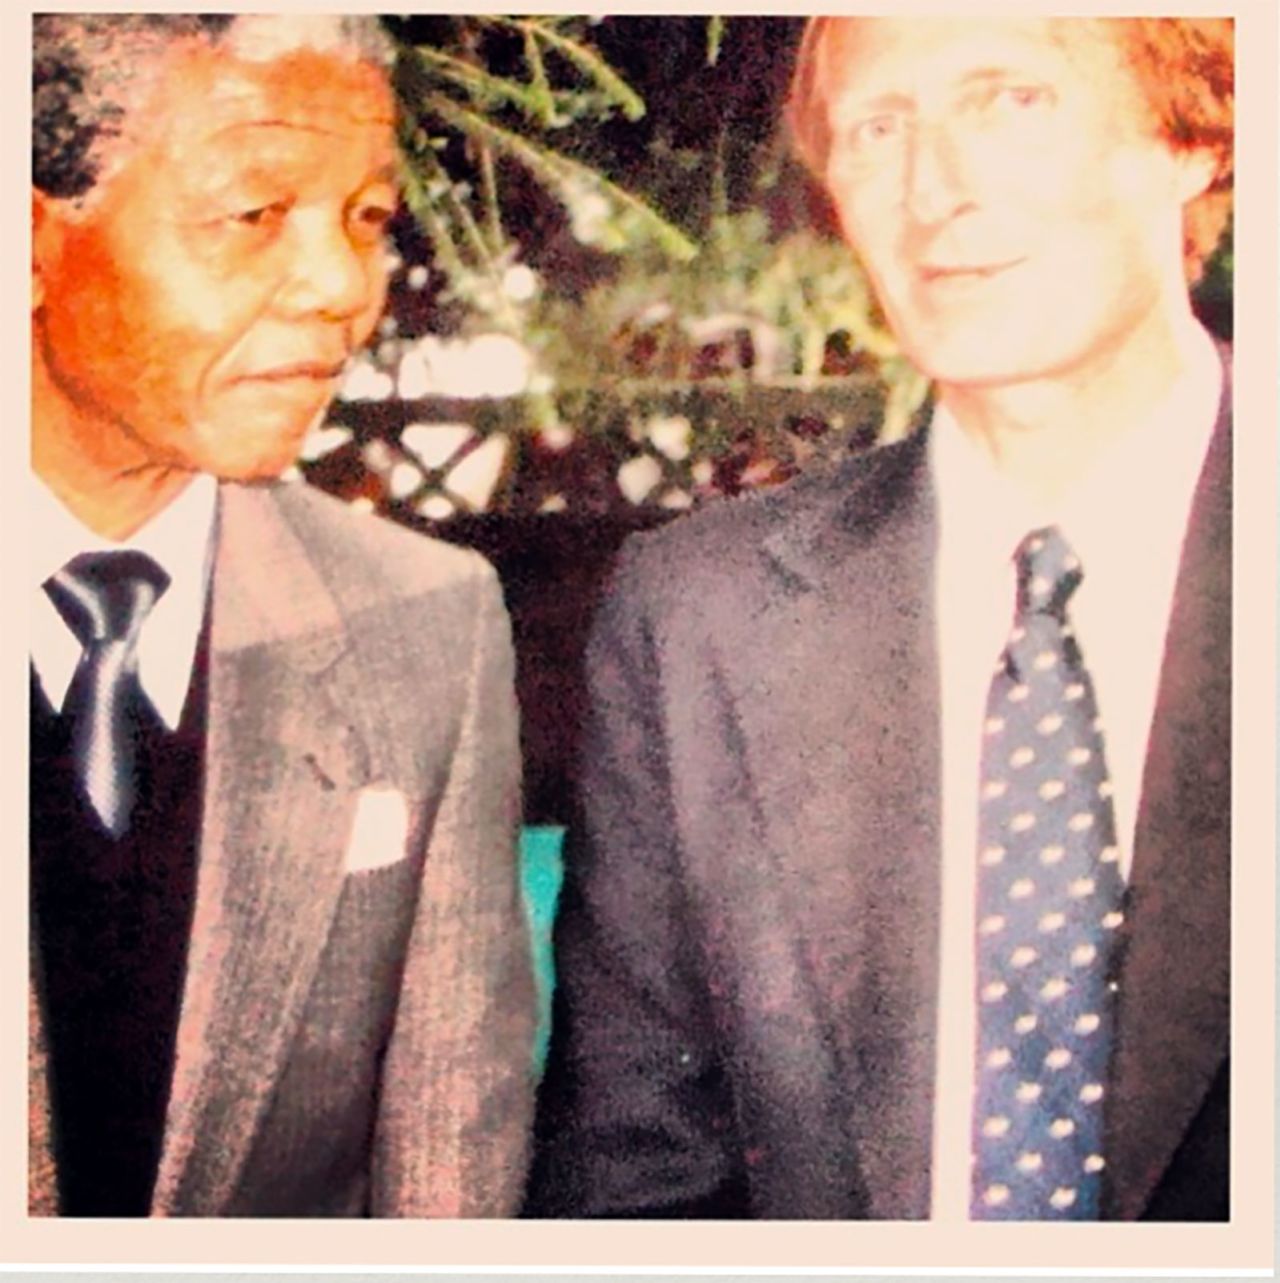 Strieker interviewed South African President Nelson Mandela shortly after his 1994 election, a momentous occasion for the country and a career highlight for Strieker.